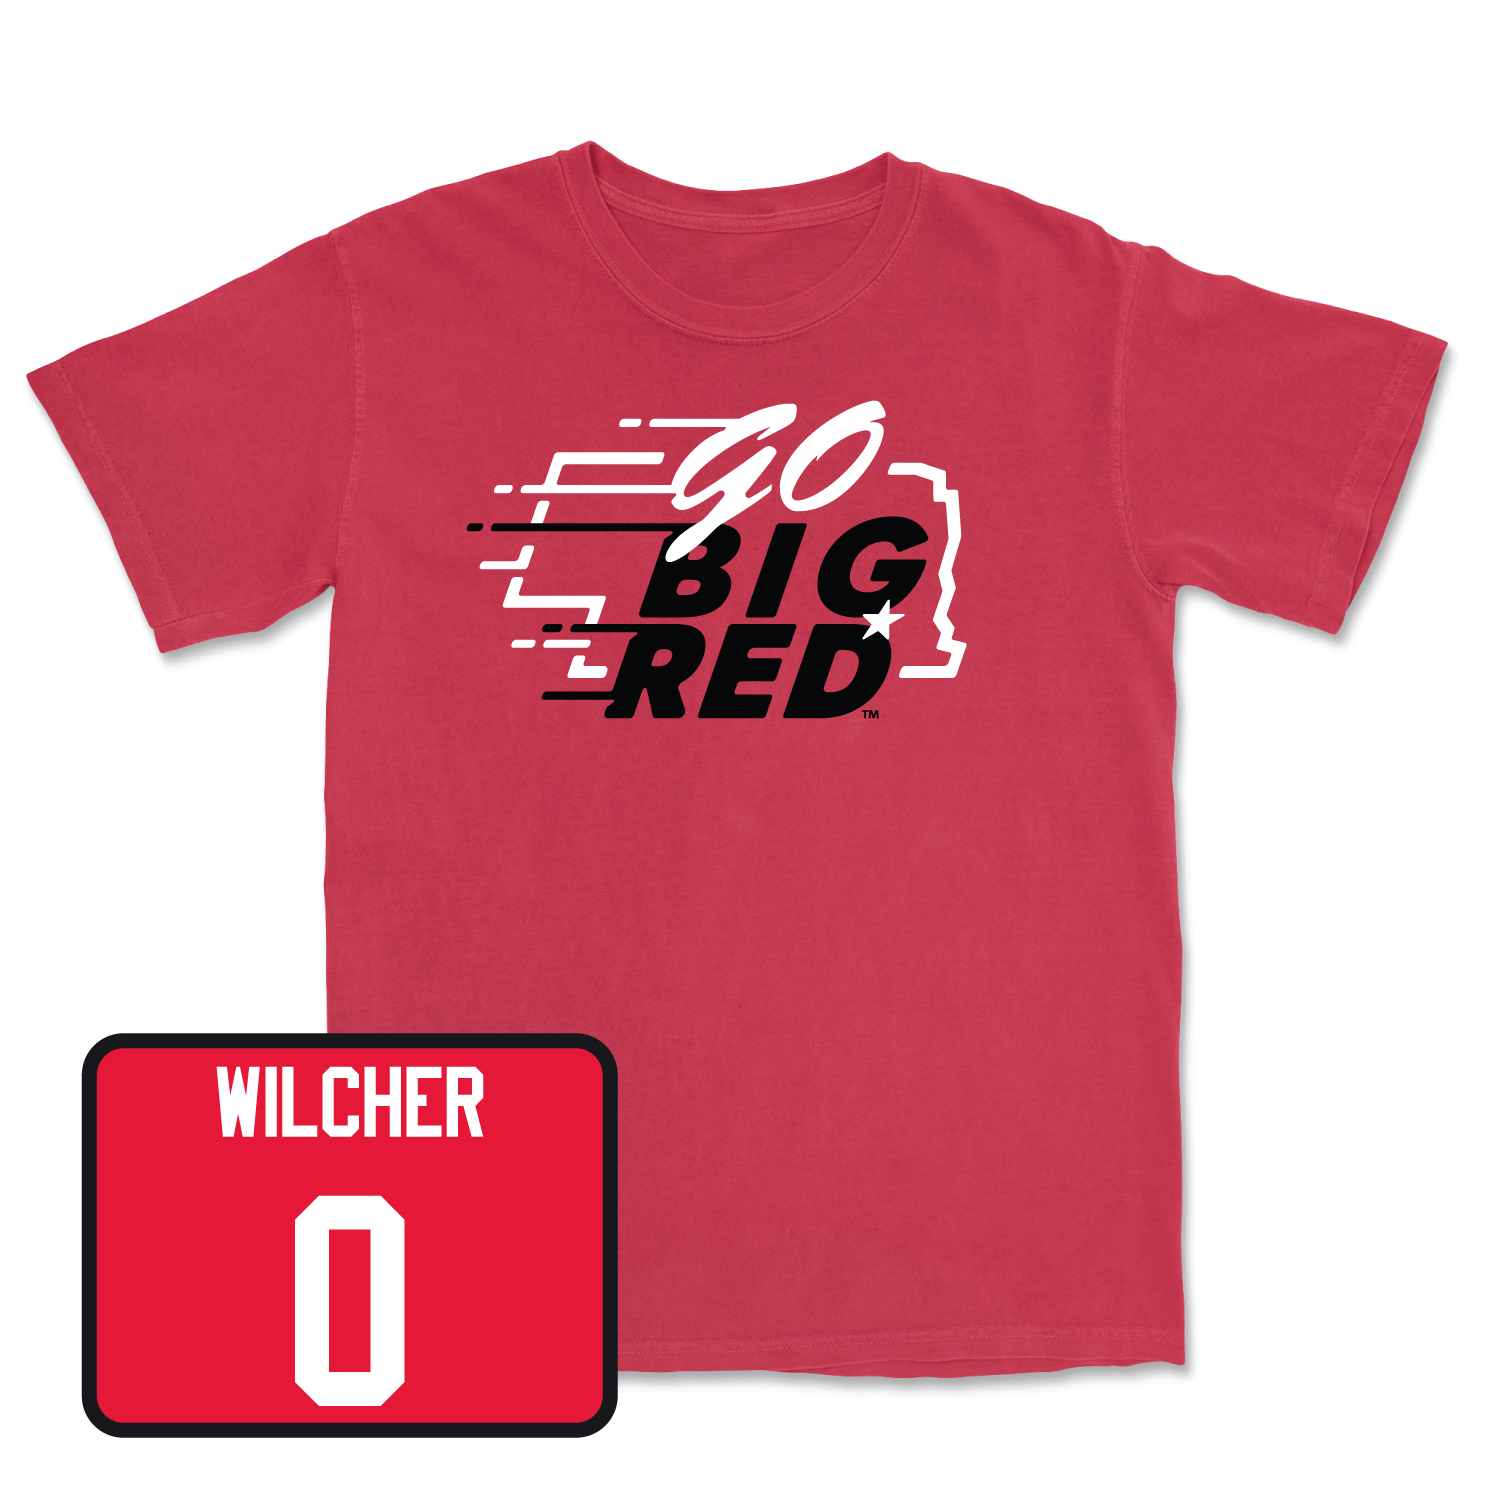 Red Men's Basketball GBR Tee Youth Small / C.J. Wilcher | #0